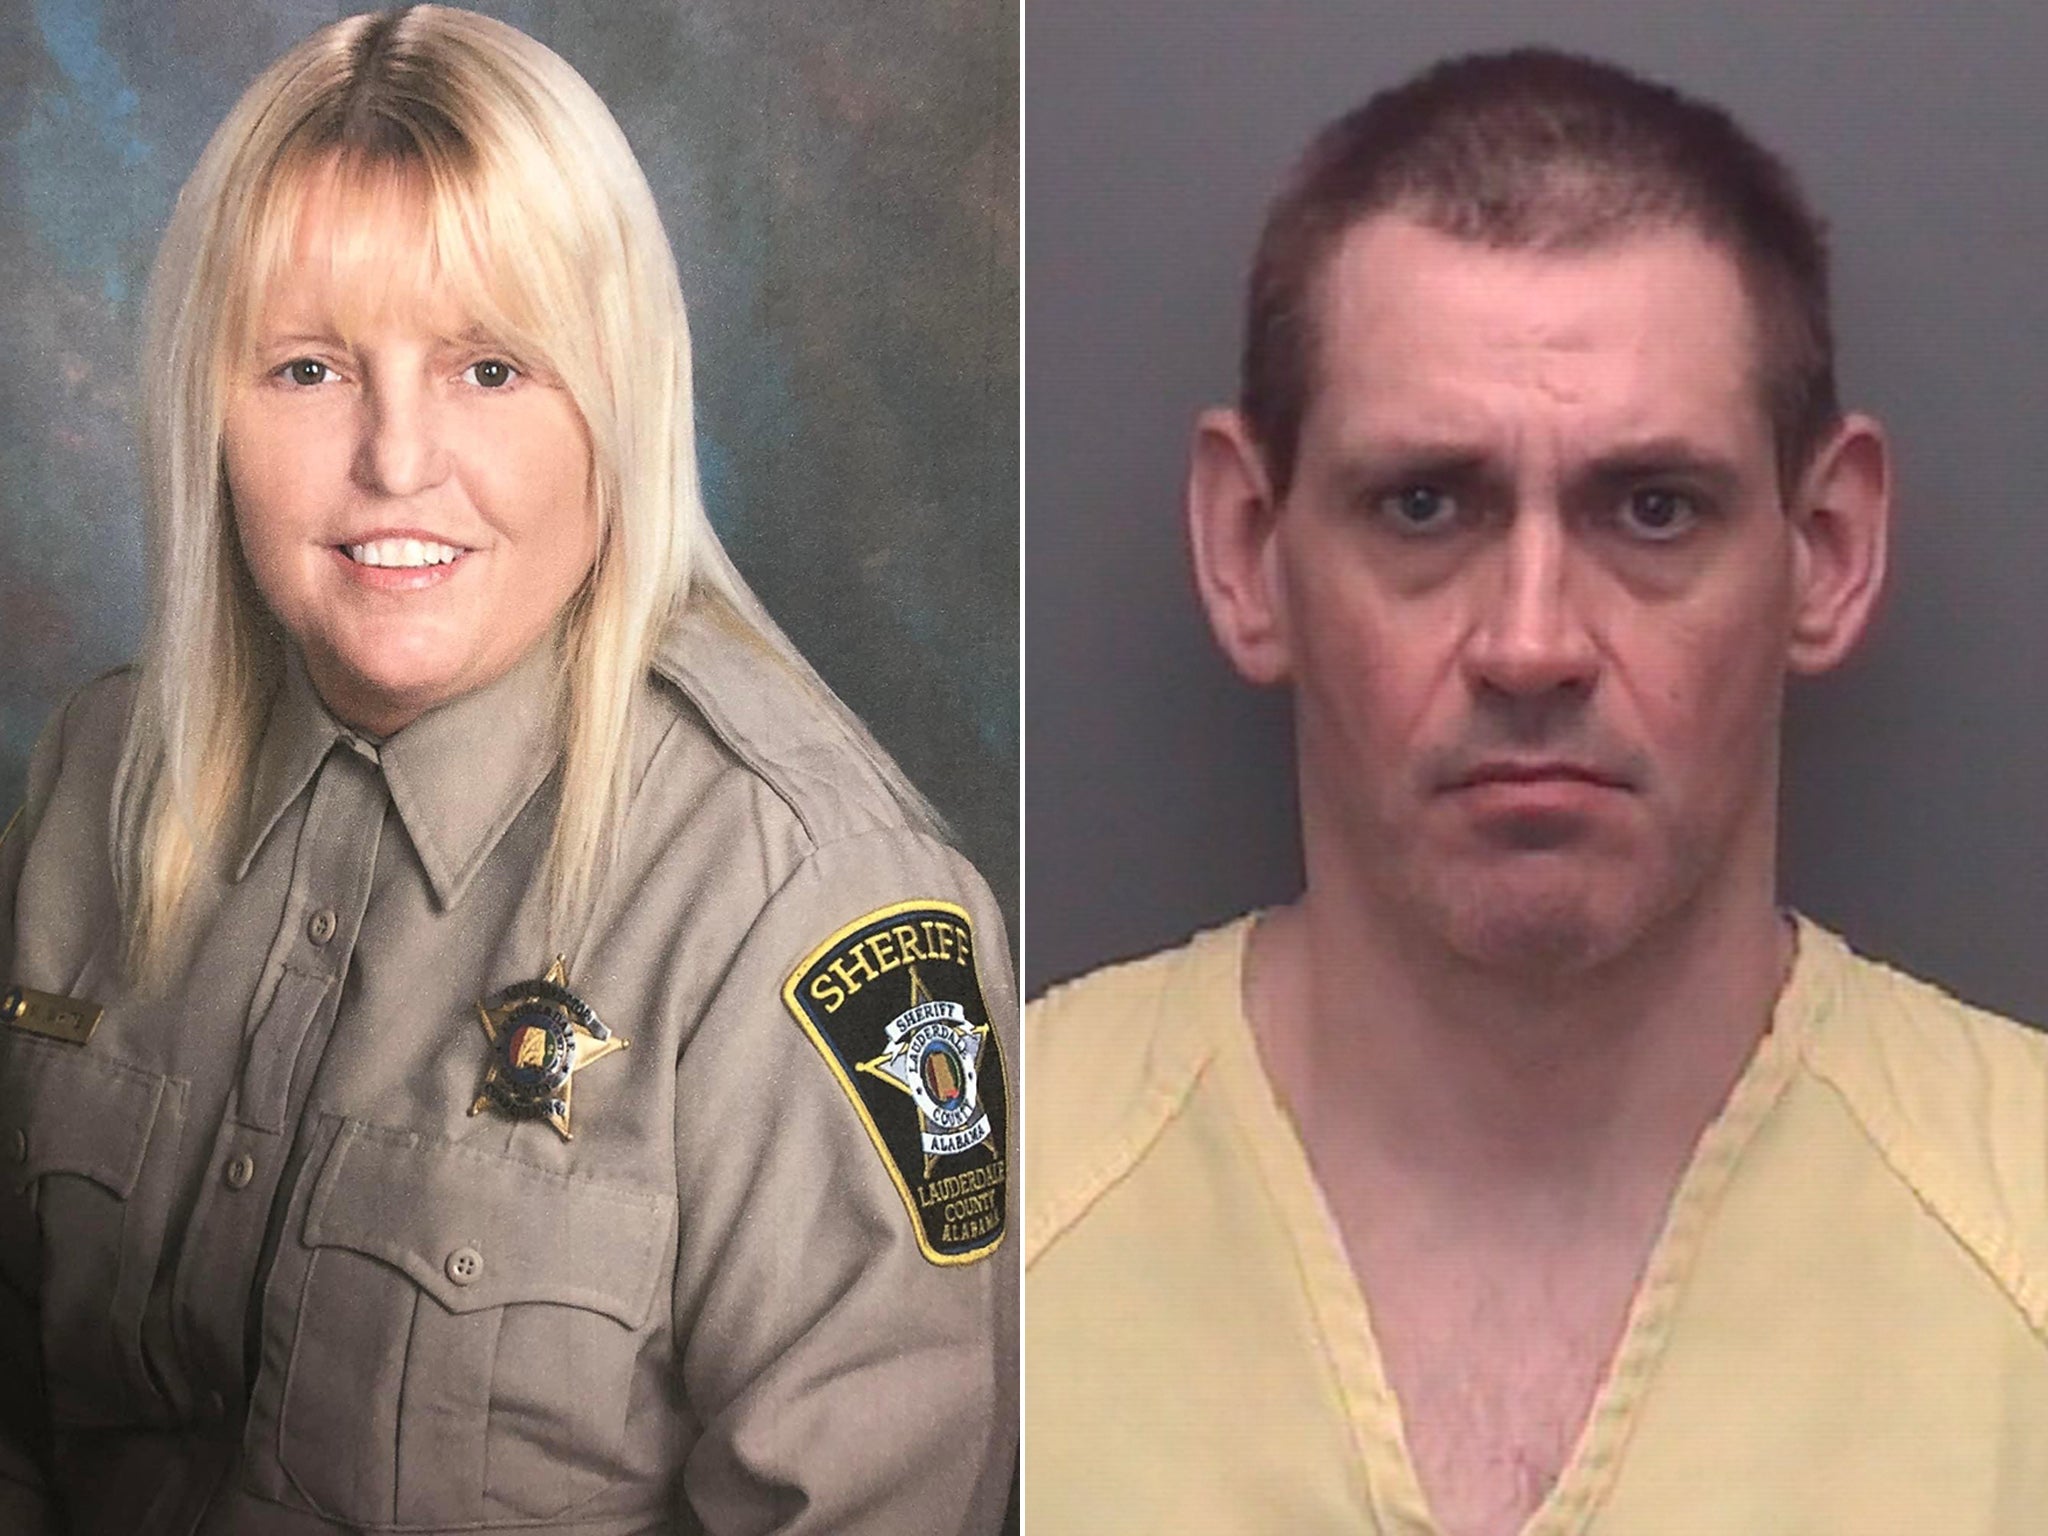 Vicky White (left) and Casey White (right) went on the run together